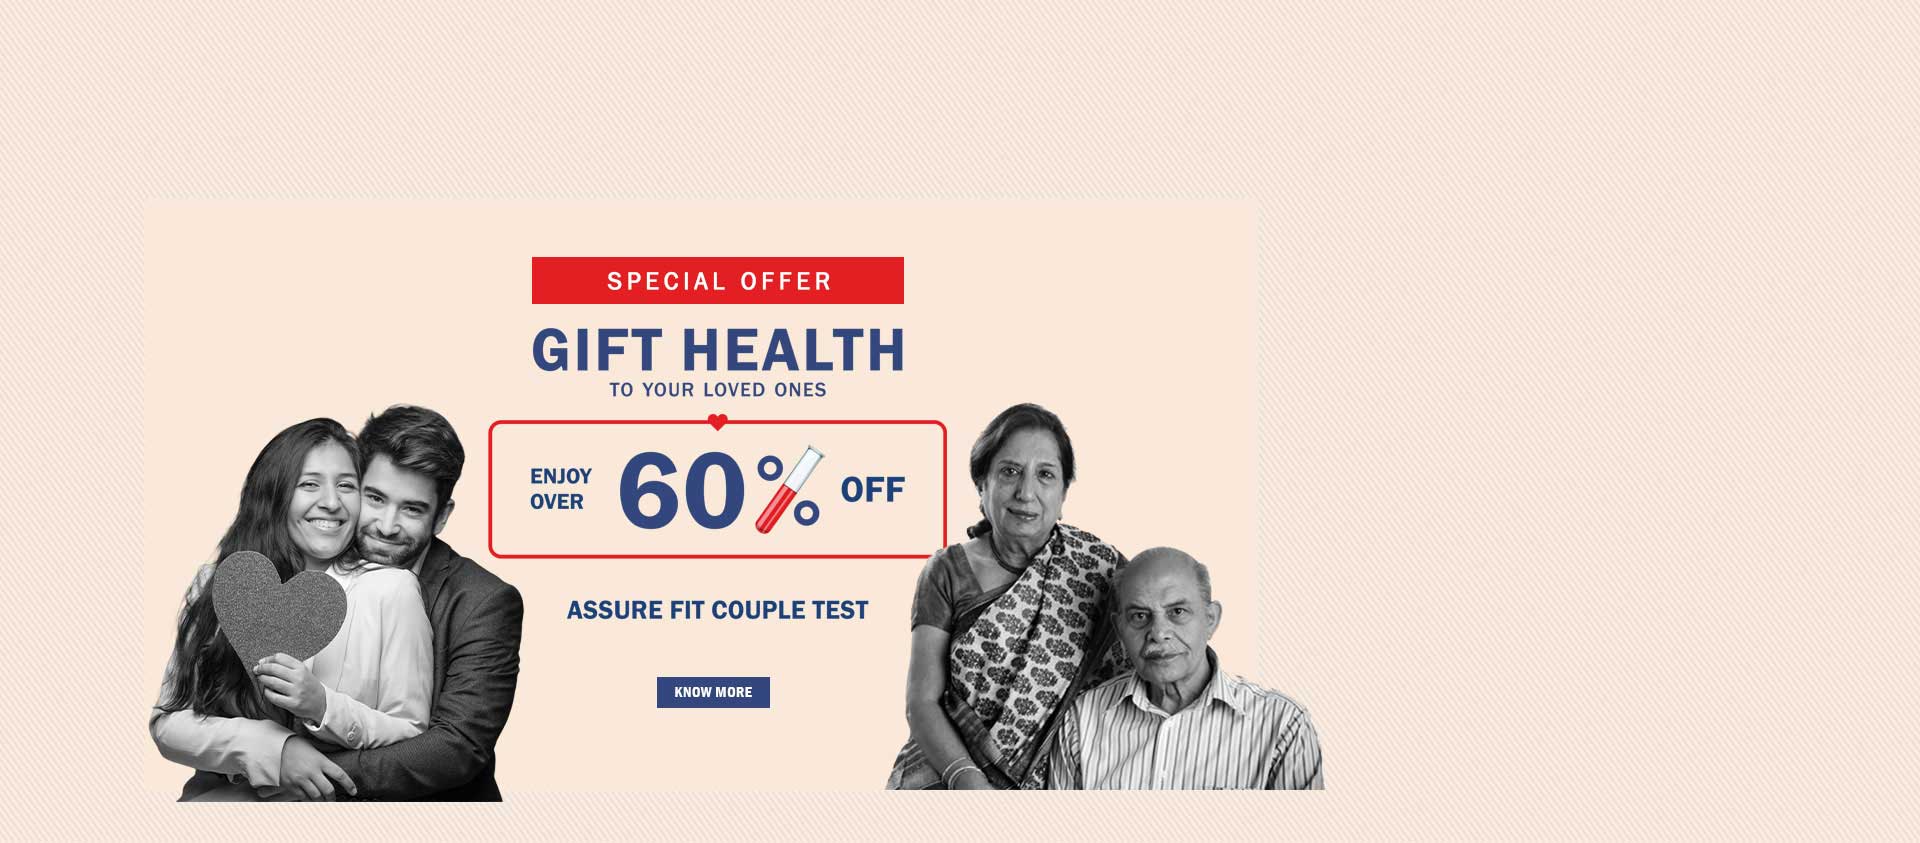 valentines-couple-health-offer